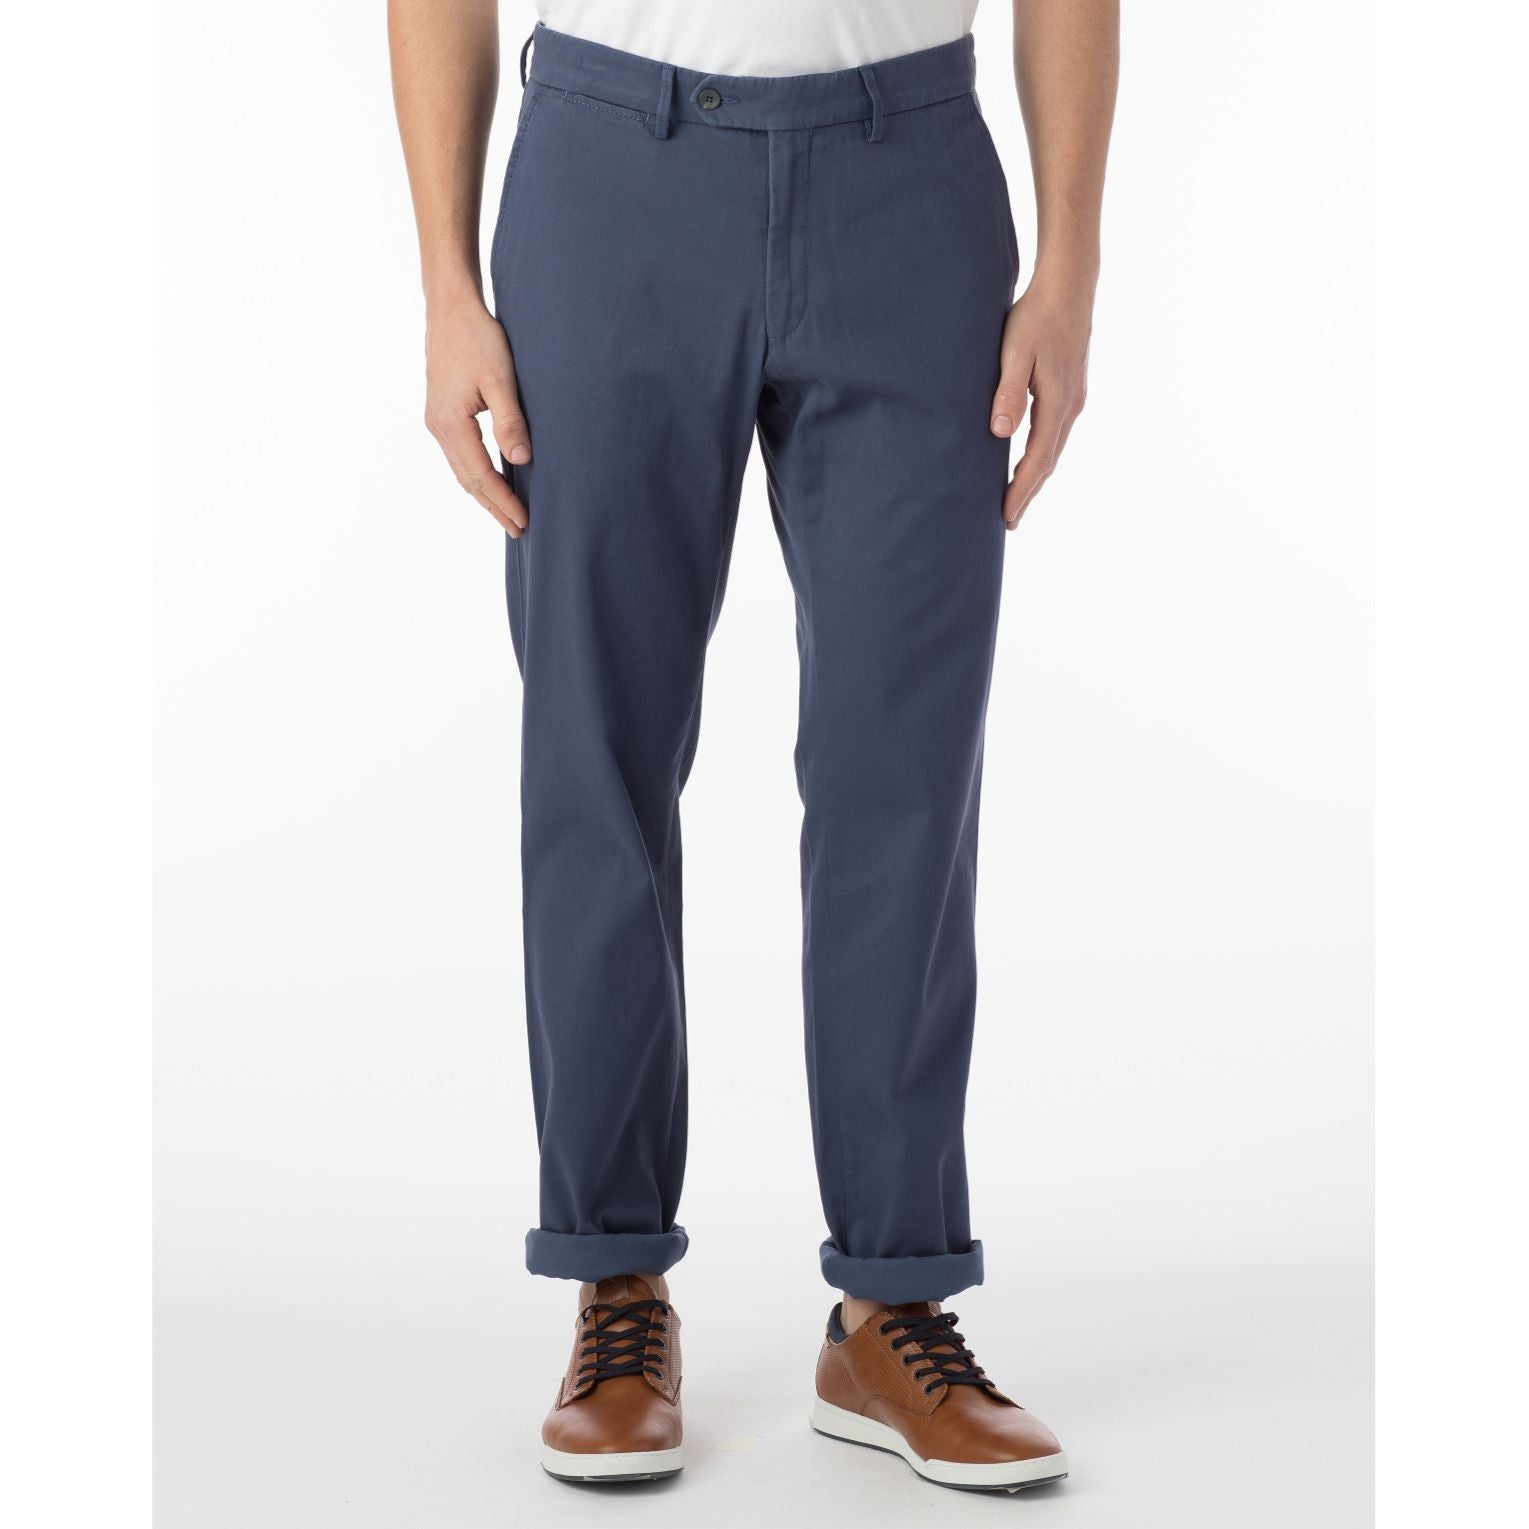 Perma Color Pima Twill Khaki Pants in Cadet Blue (Flat Front Models) by Ballin